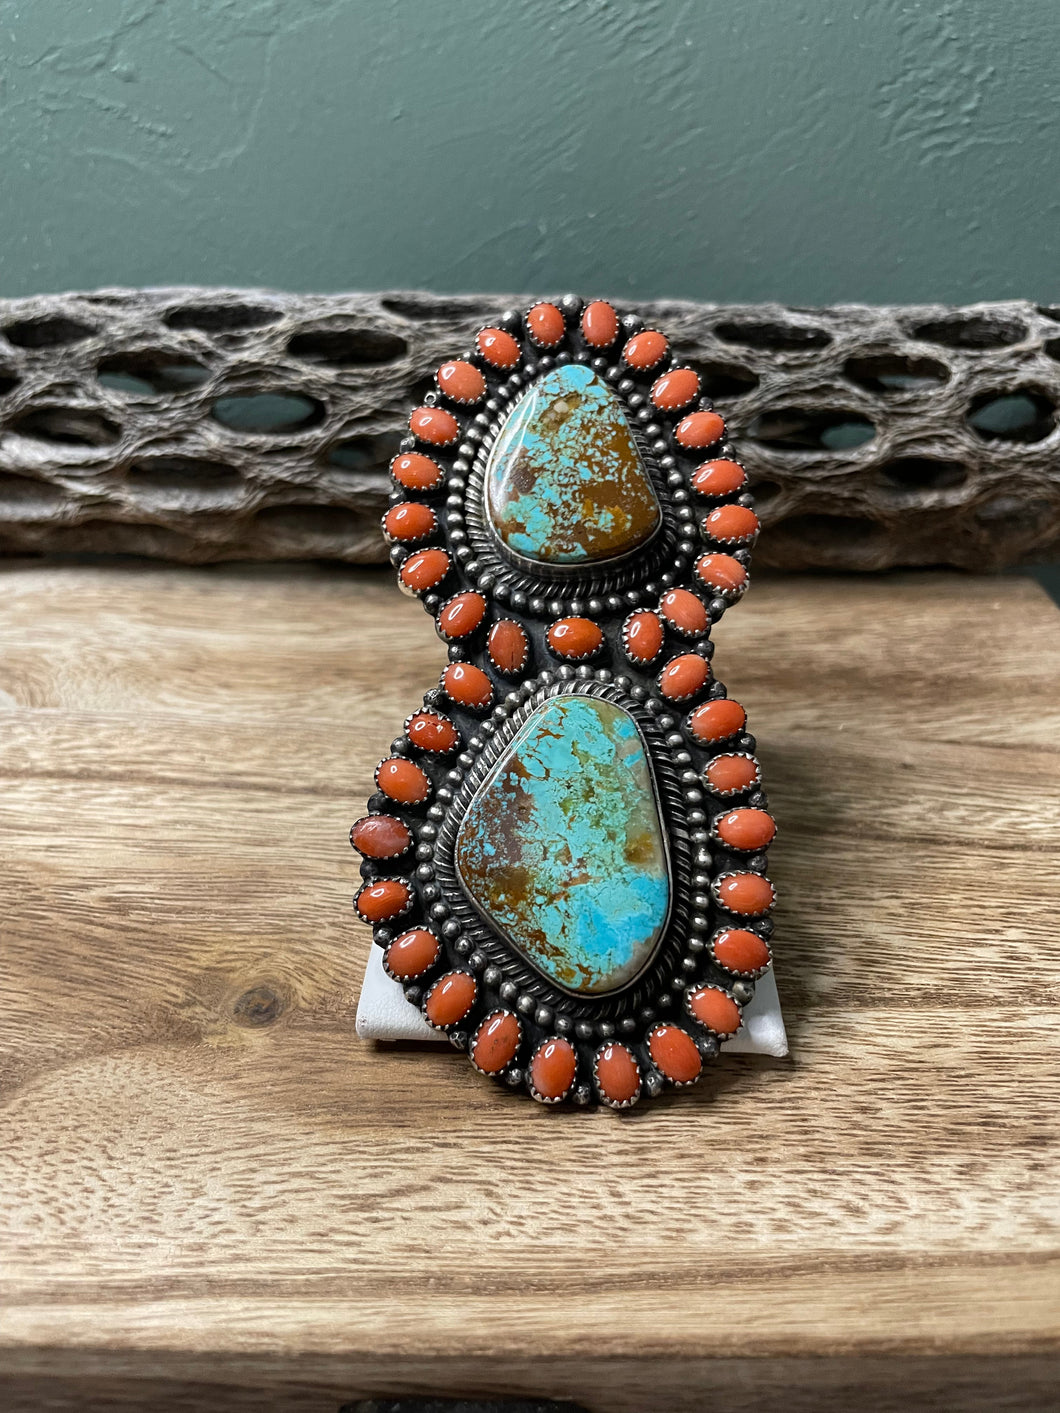 Navajo Sterling Silver Turquoise And Orange Spiny Statement Ring Sz 10